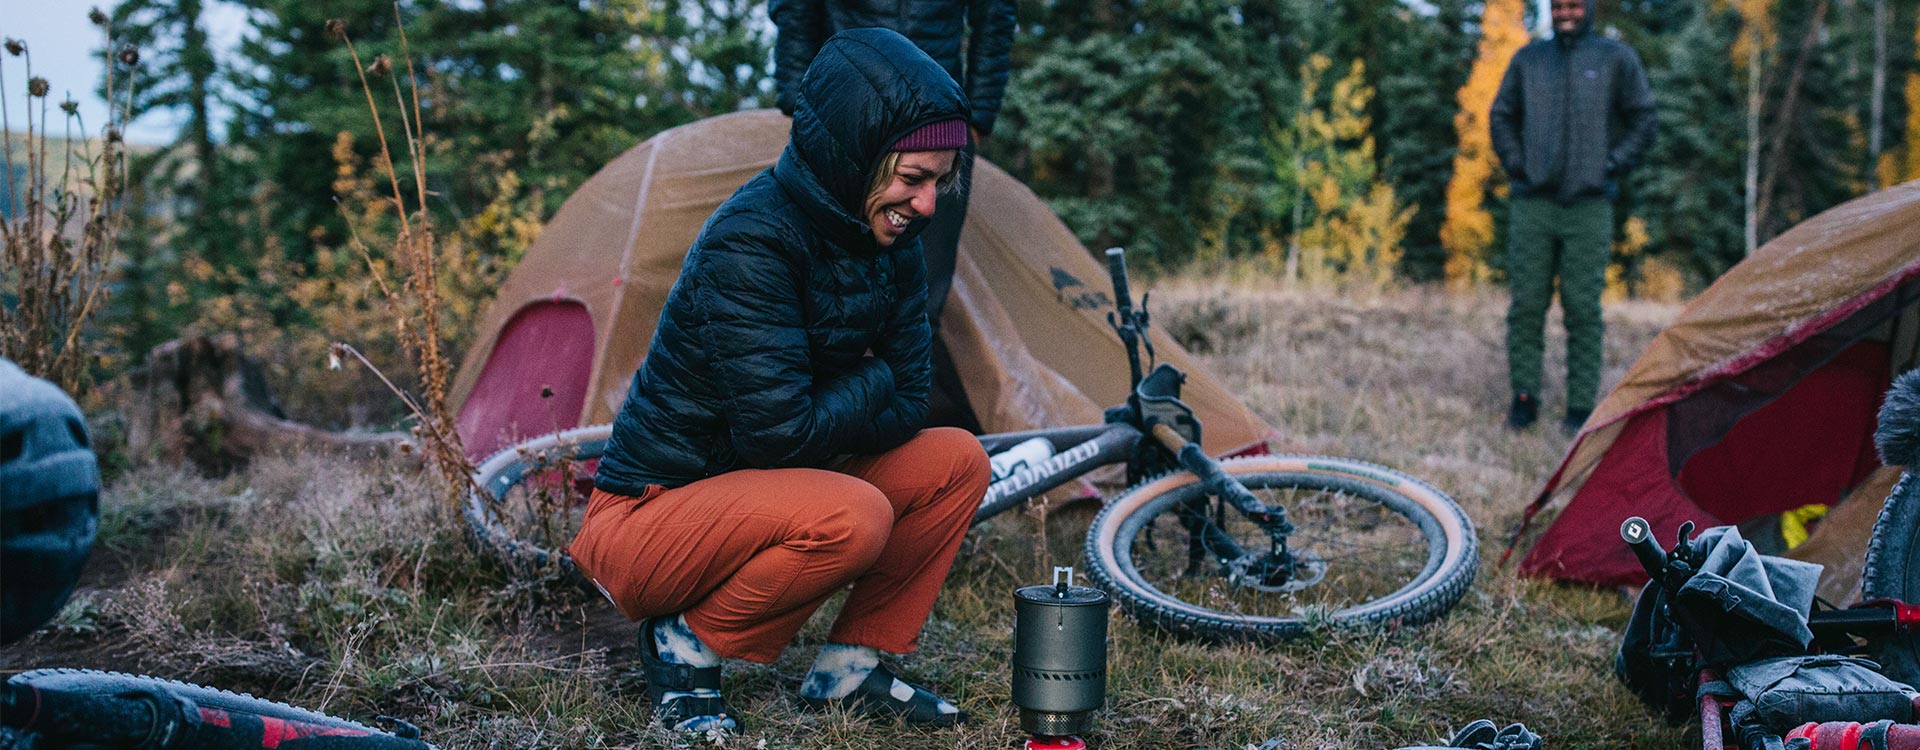 FUEL YOUR ADVENTURES - Legendary performance for your backcountry kitchen